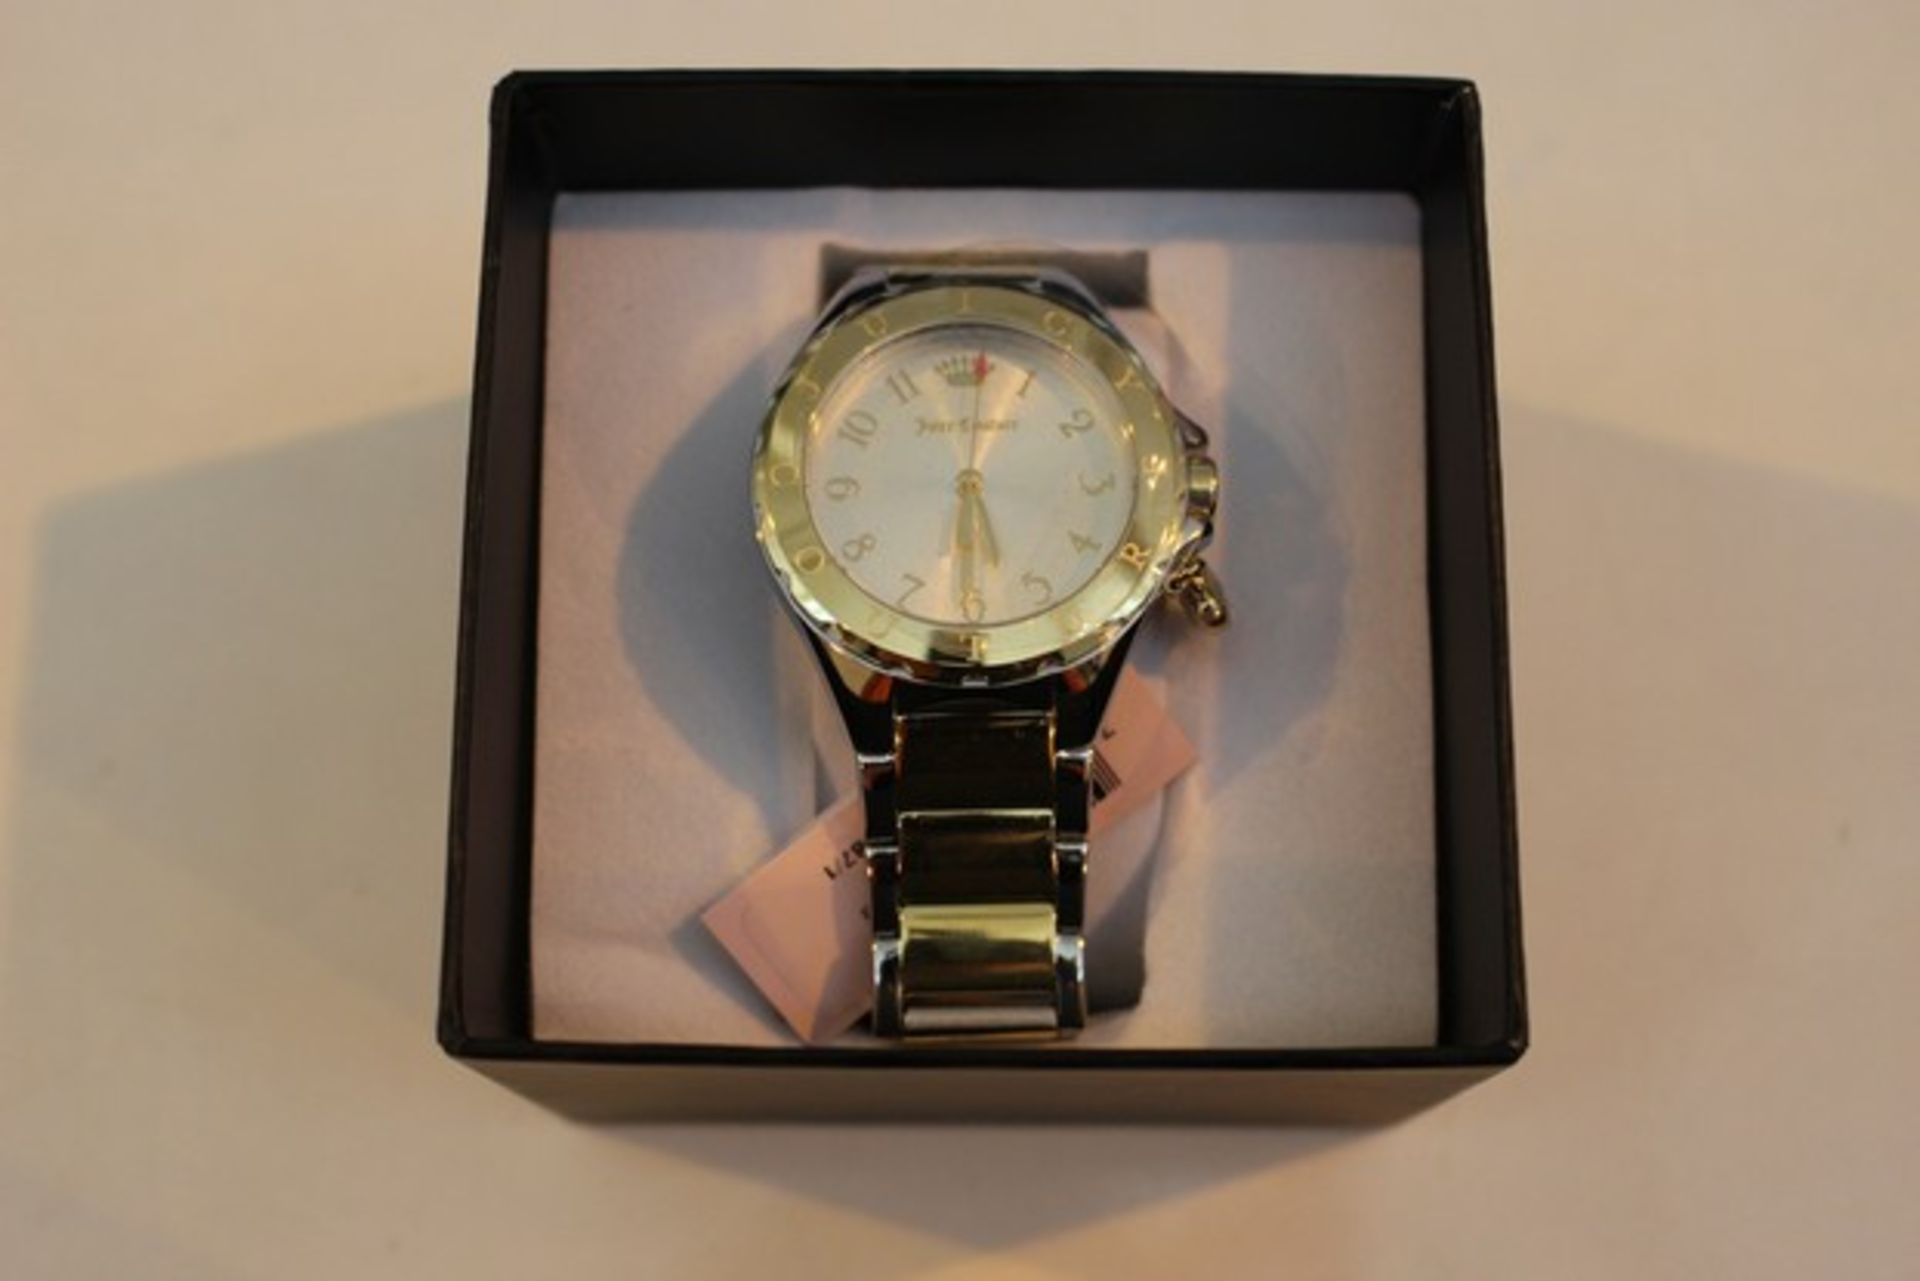 1X BOXED BRAND NEW LADIES JUICY COUTURE FANCY DESIGN WRIST WATCH WITH 2 YEARS INTERNATIONAL WARRANTY